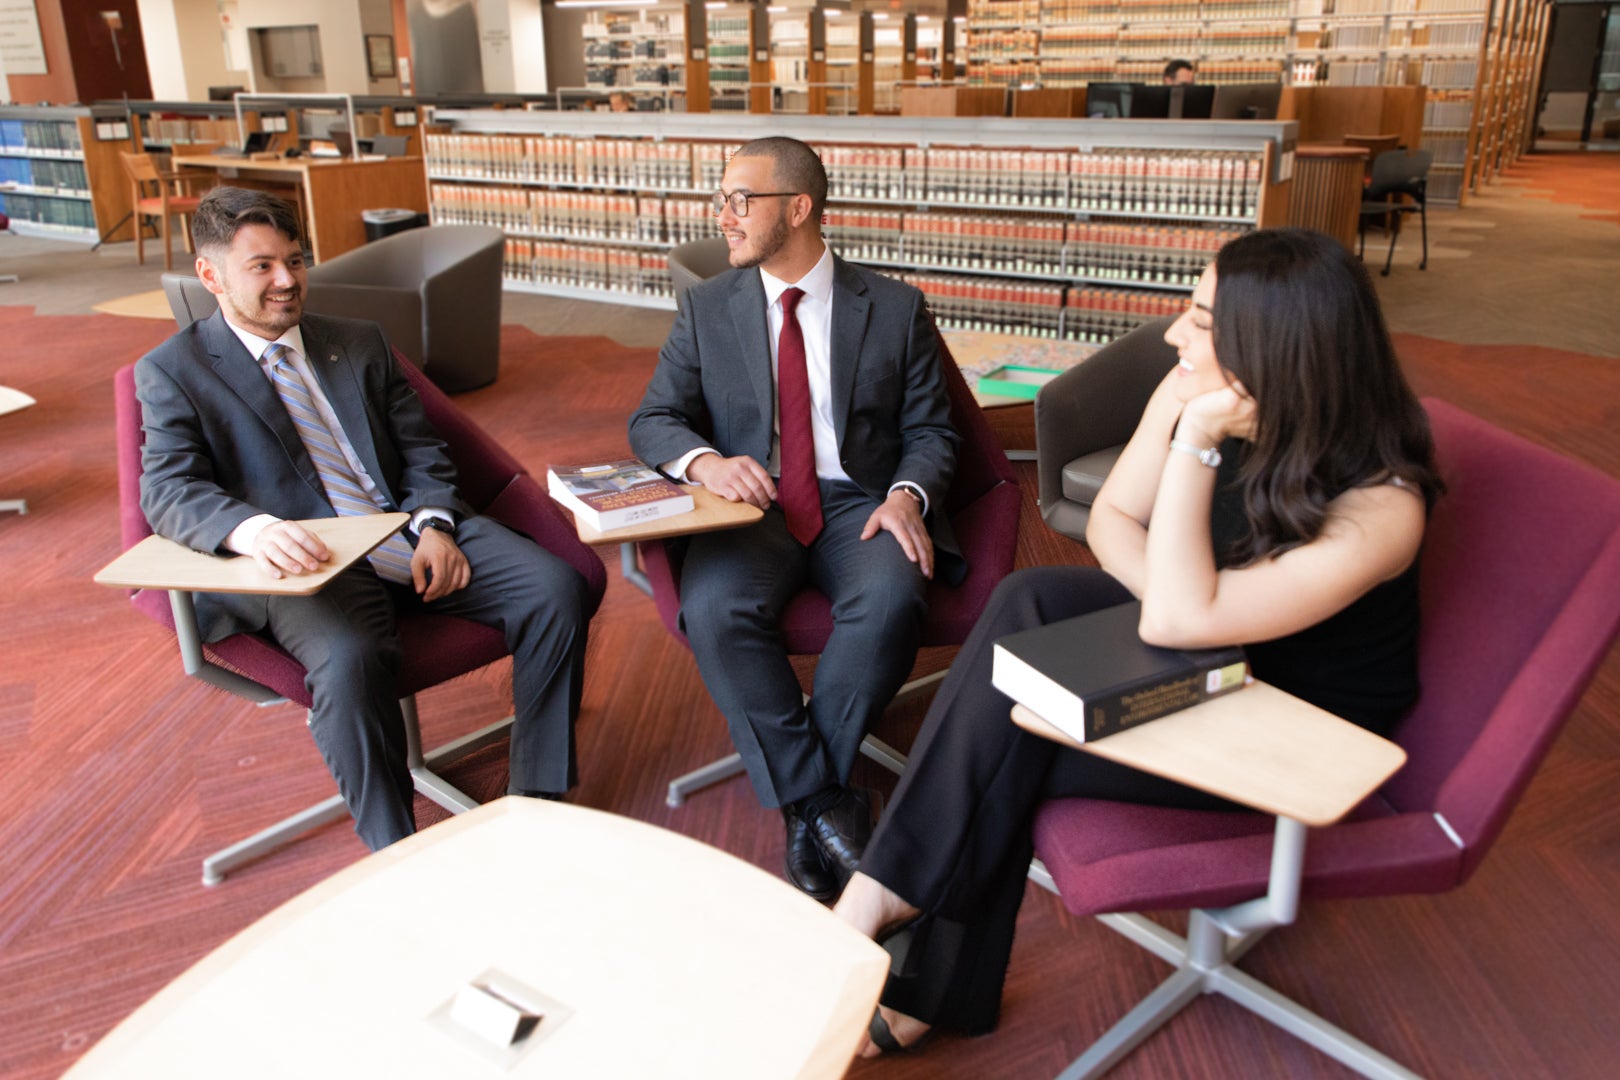 Three ASU Law student sitting and chatting in the Ross-Blakely Law Library on maroon library chairs.